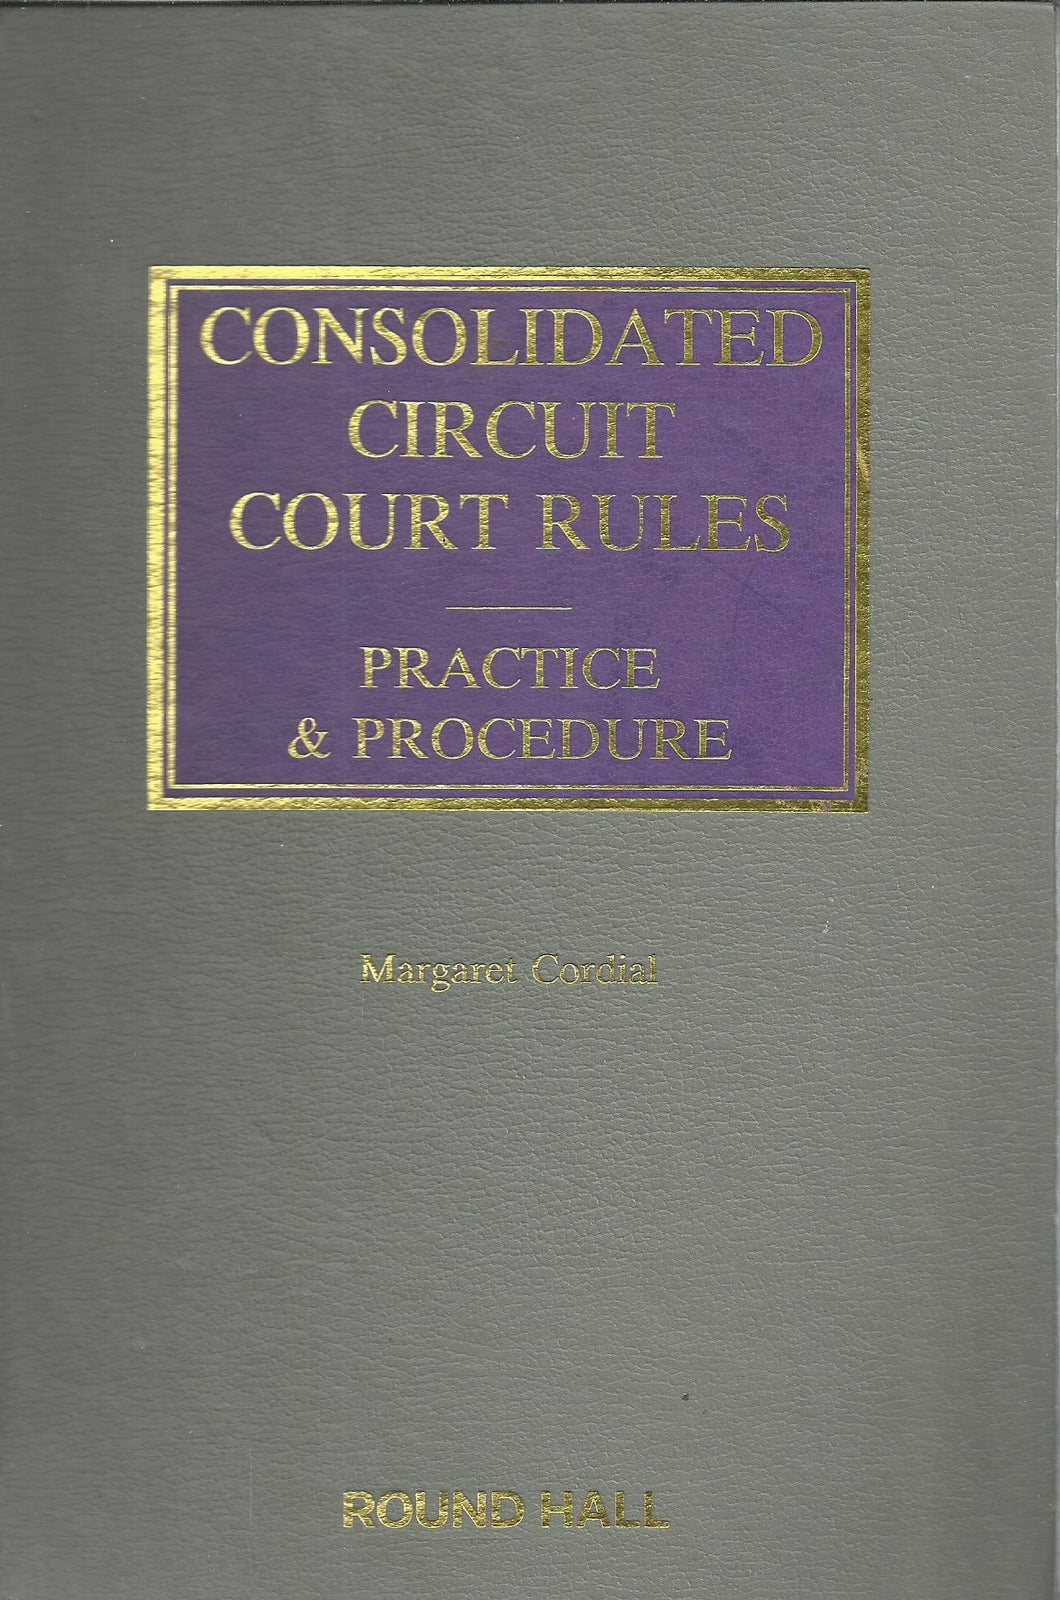 Consolidated Circuit Court Rules: Practice and Procedure